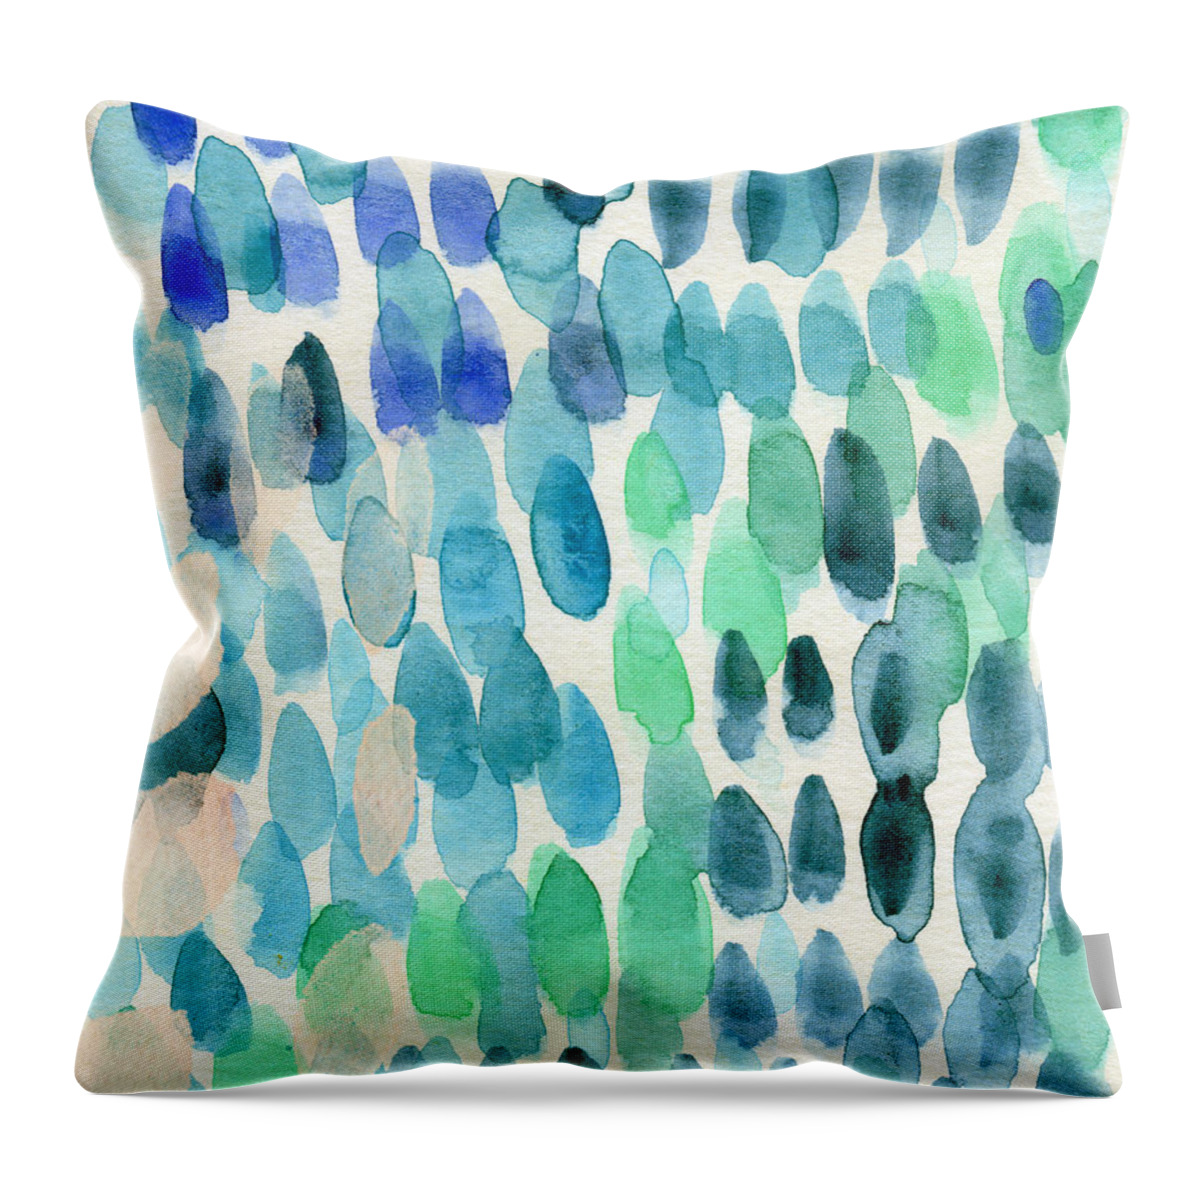 Water Throw Pillow featuring the painting Waterfall 2- Abstract Art by Linda Woods by Linda Woods